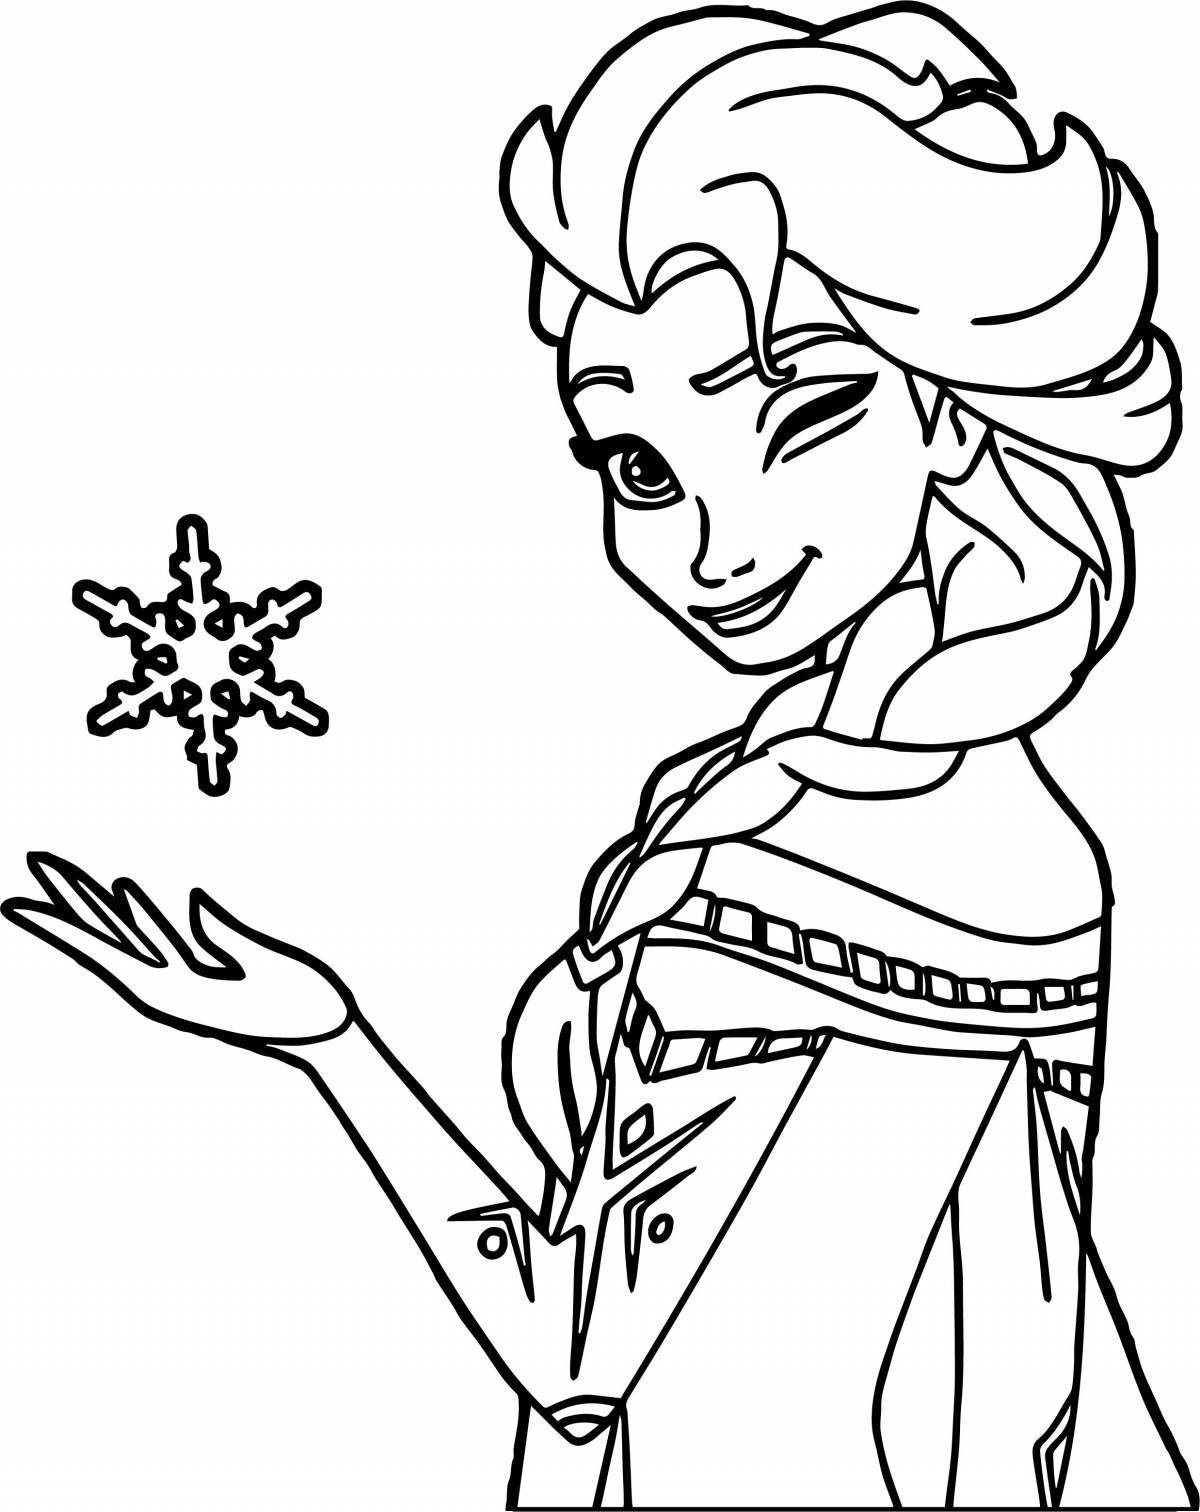 Dazzling cold heart coloring book for girls